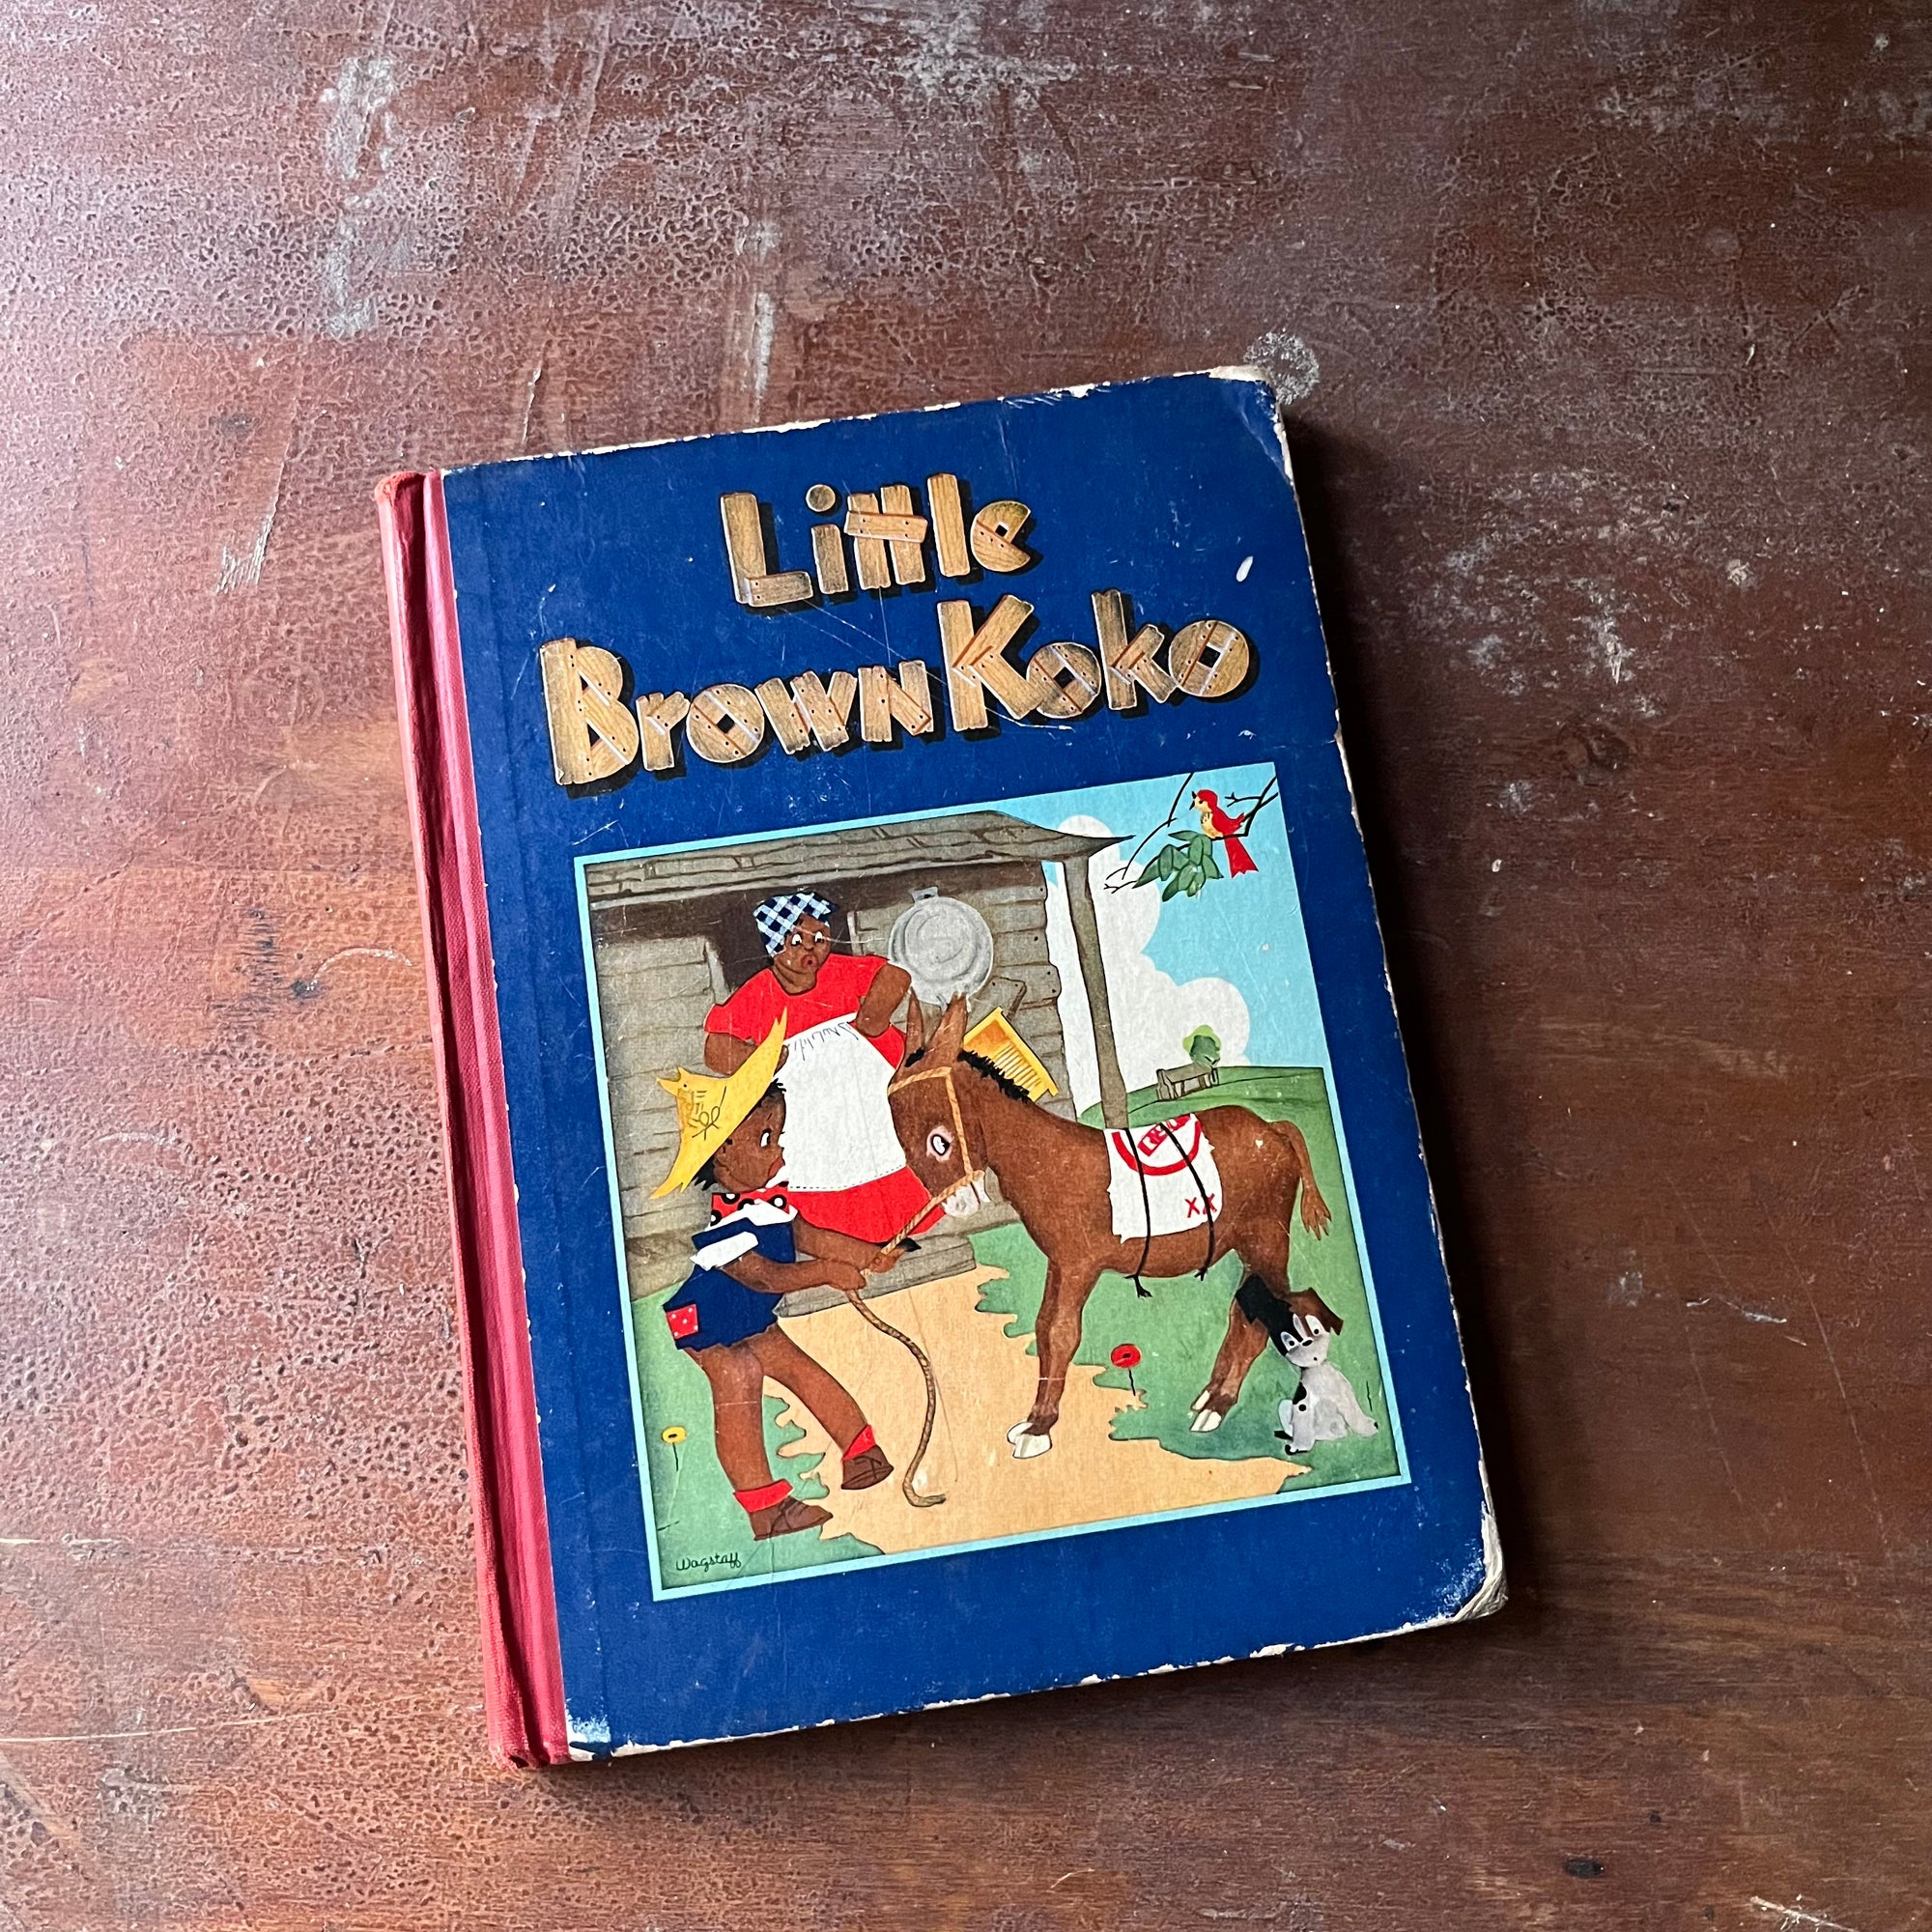 vintage children's story book - Stories of Little Brown Koko written by Blanche Seale Hunt with illustrations by Dorothy Wagstaff - view of the front cover